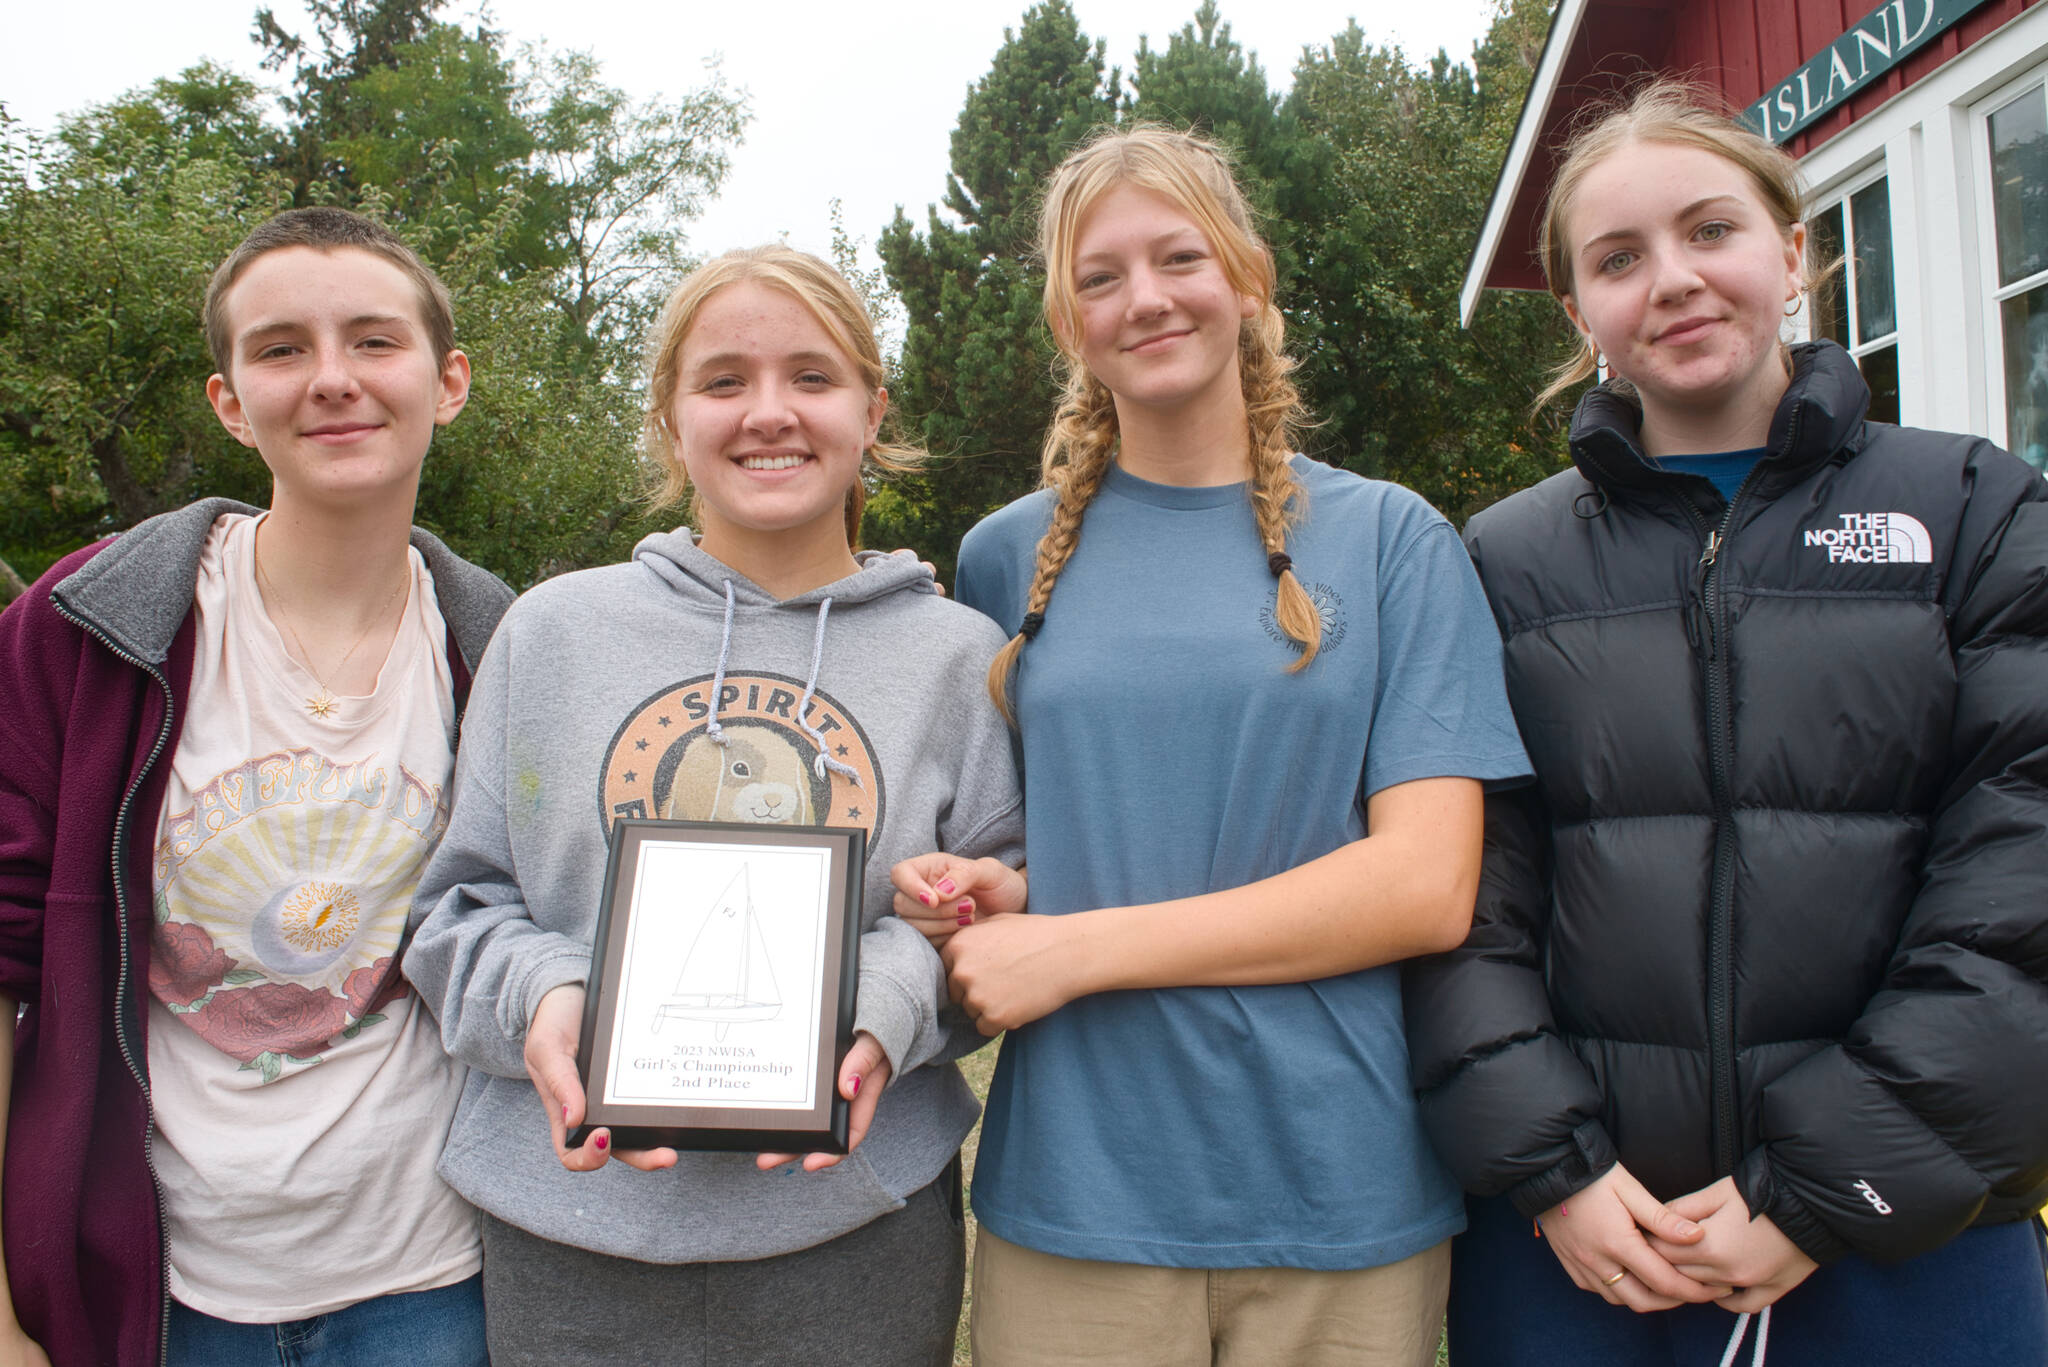 Juliette MeKenney, Lola Walker, Dagny Kruger, and Wren Ontjes, posing with their trophy after the Orcas team’s first podium finish since 2017.